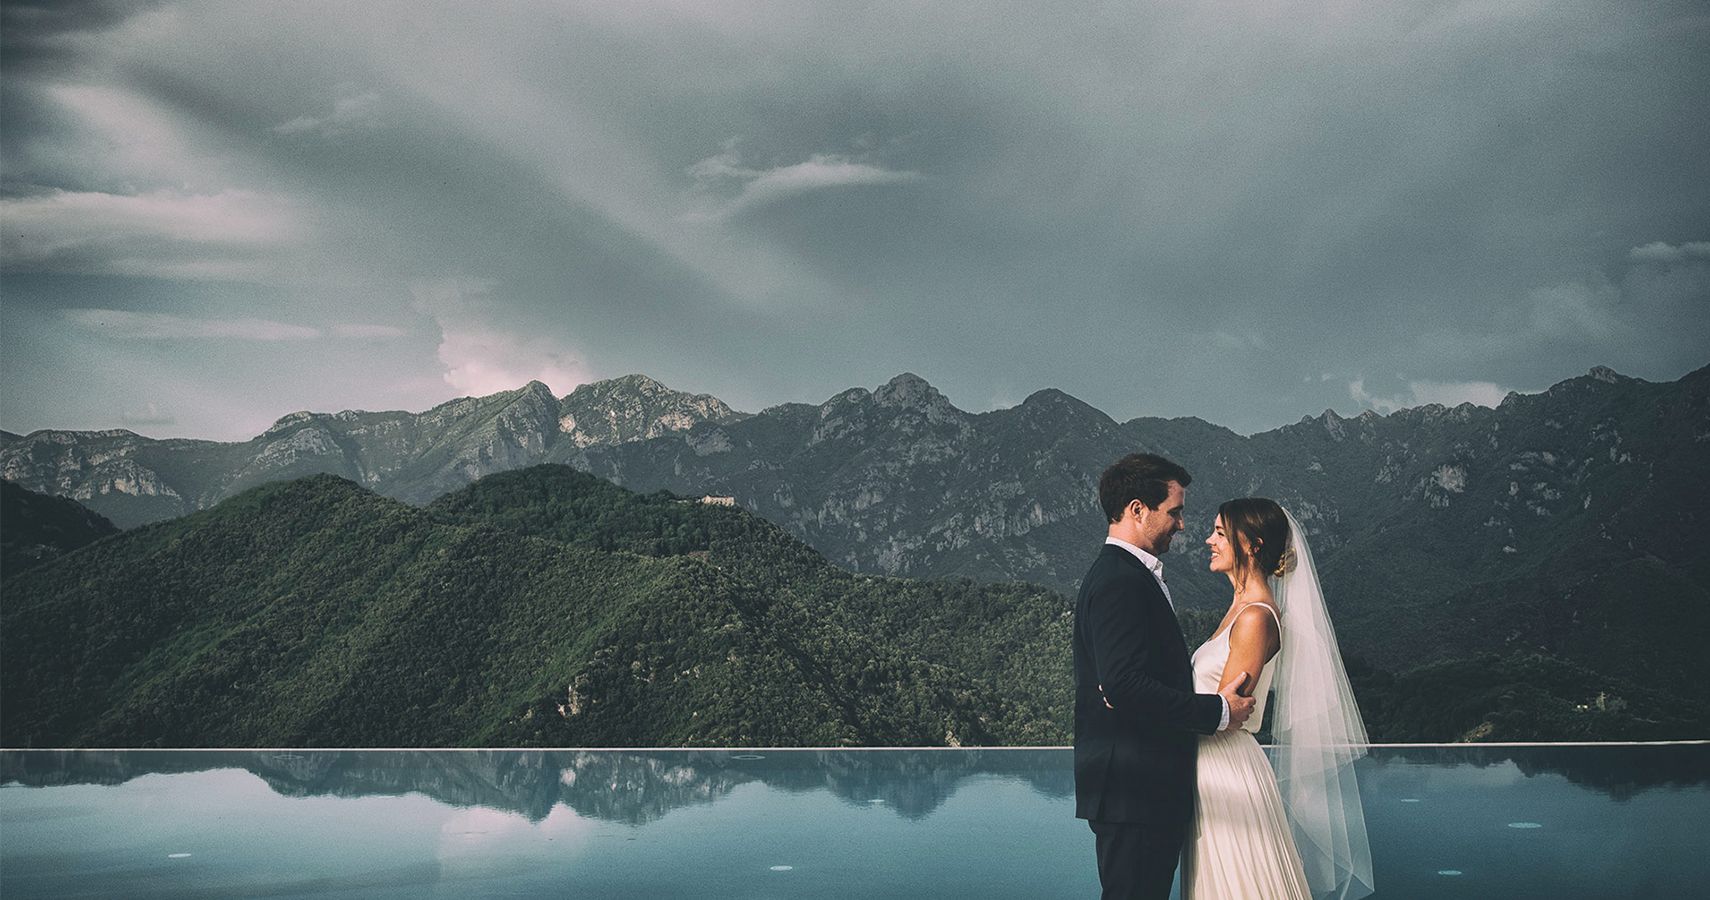 10 Most Beautiful Wedding Venues to Marry the Love of Your Life